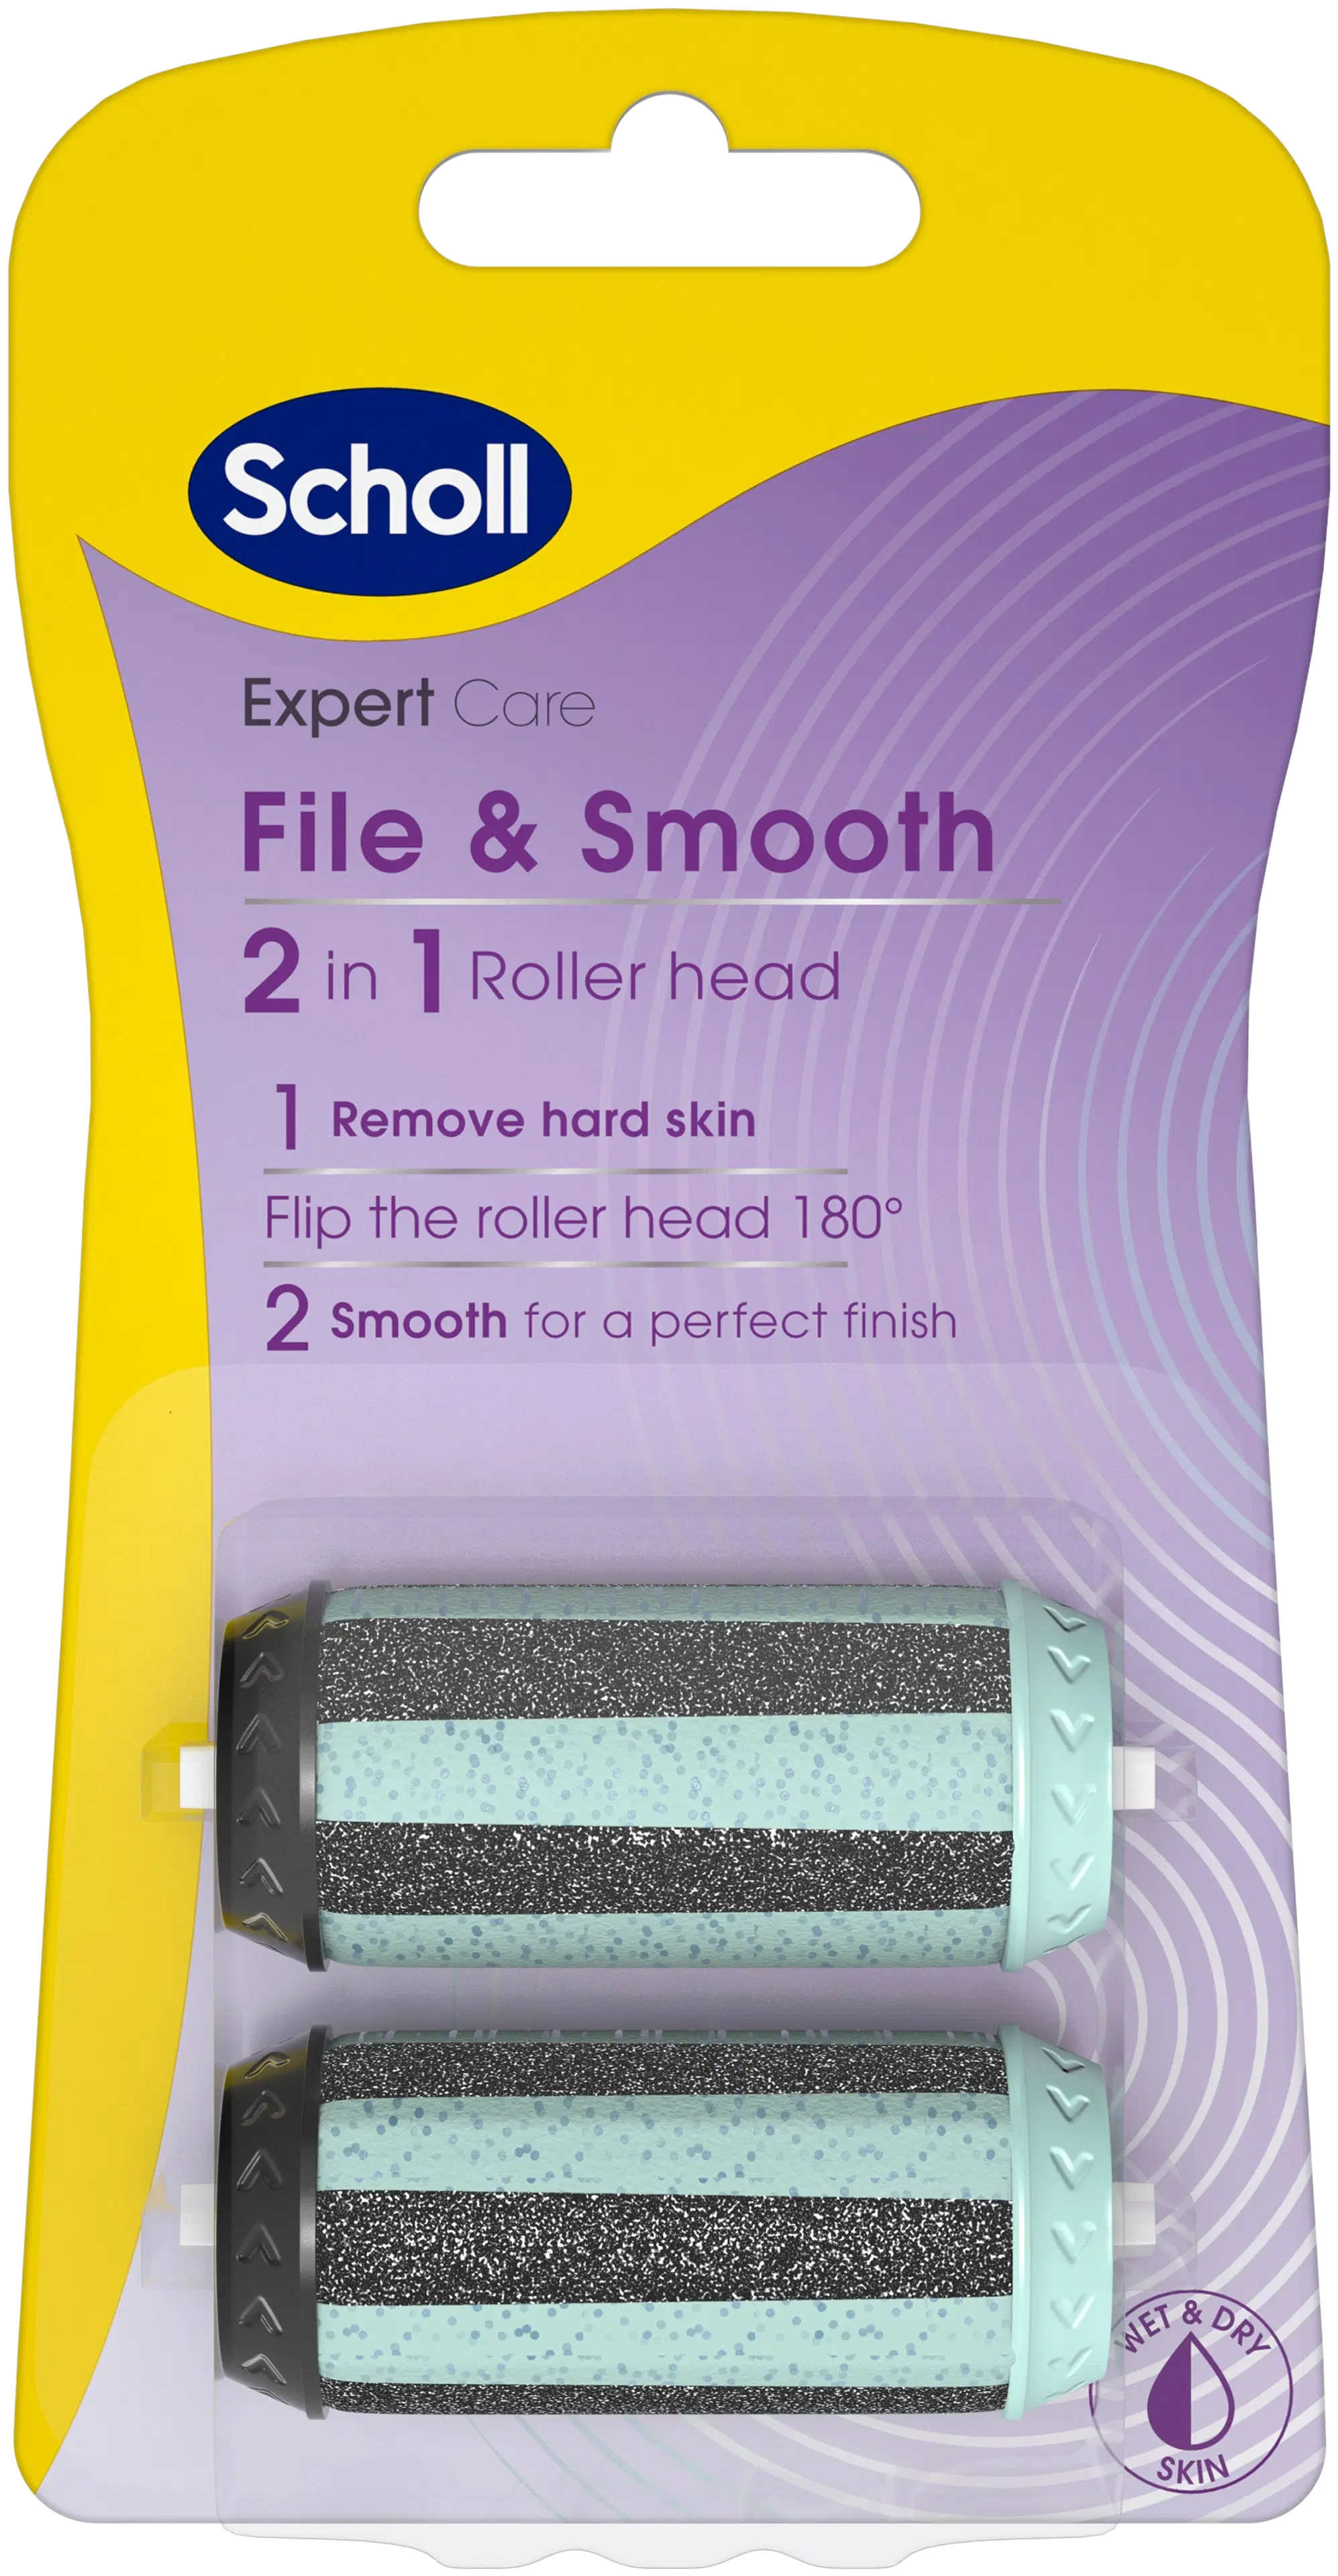 Scholl Expert Care Dual Action Refill Pack